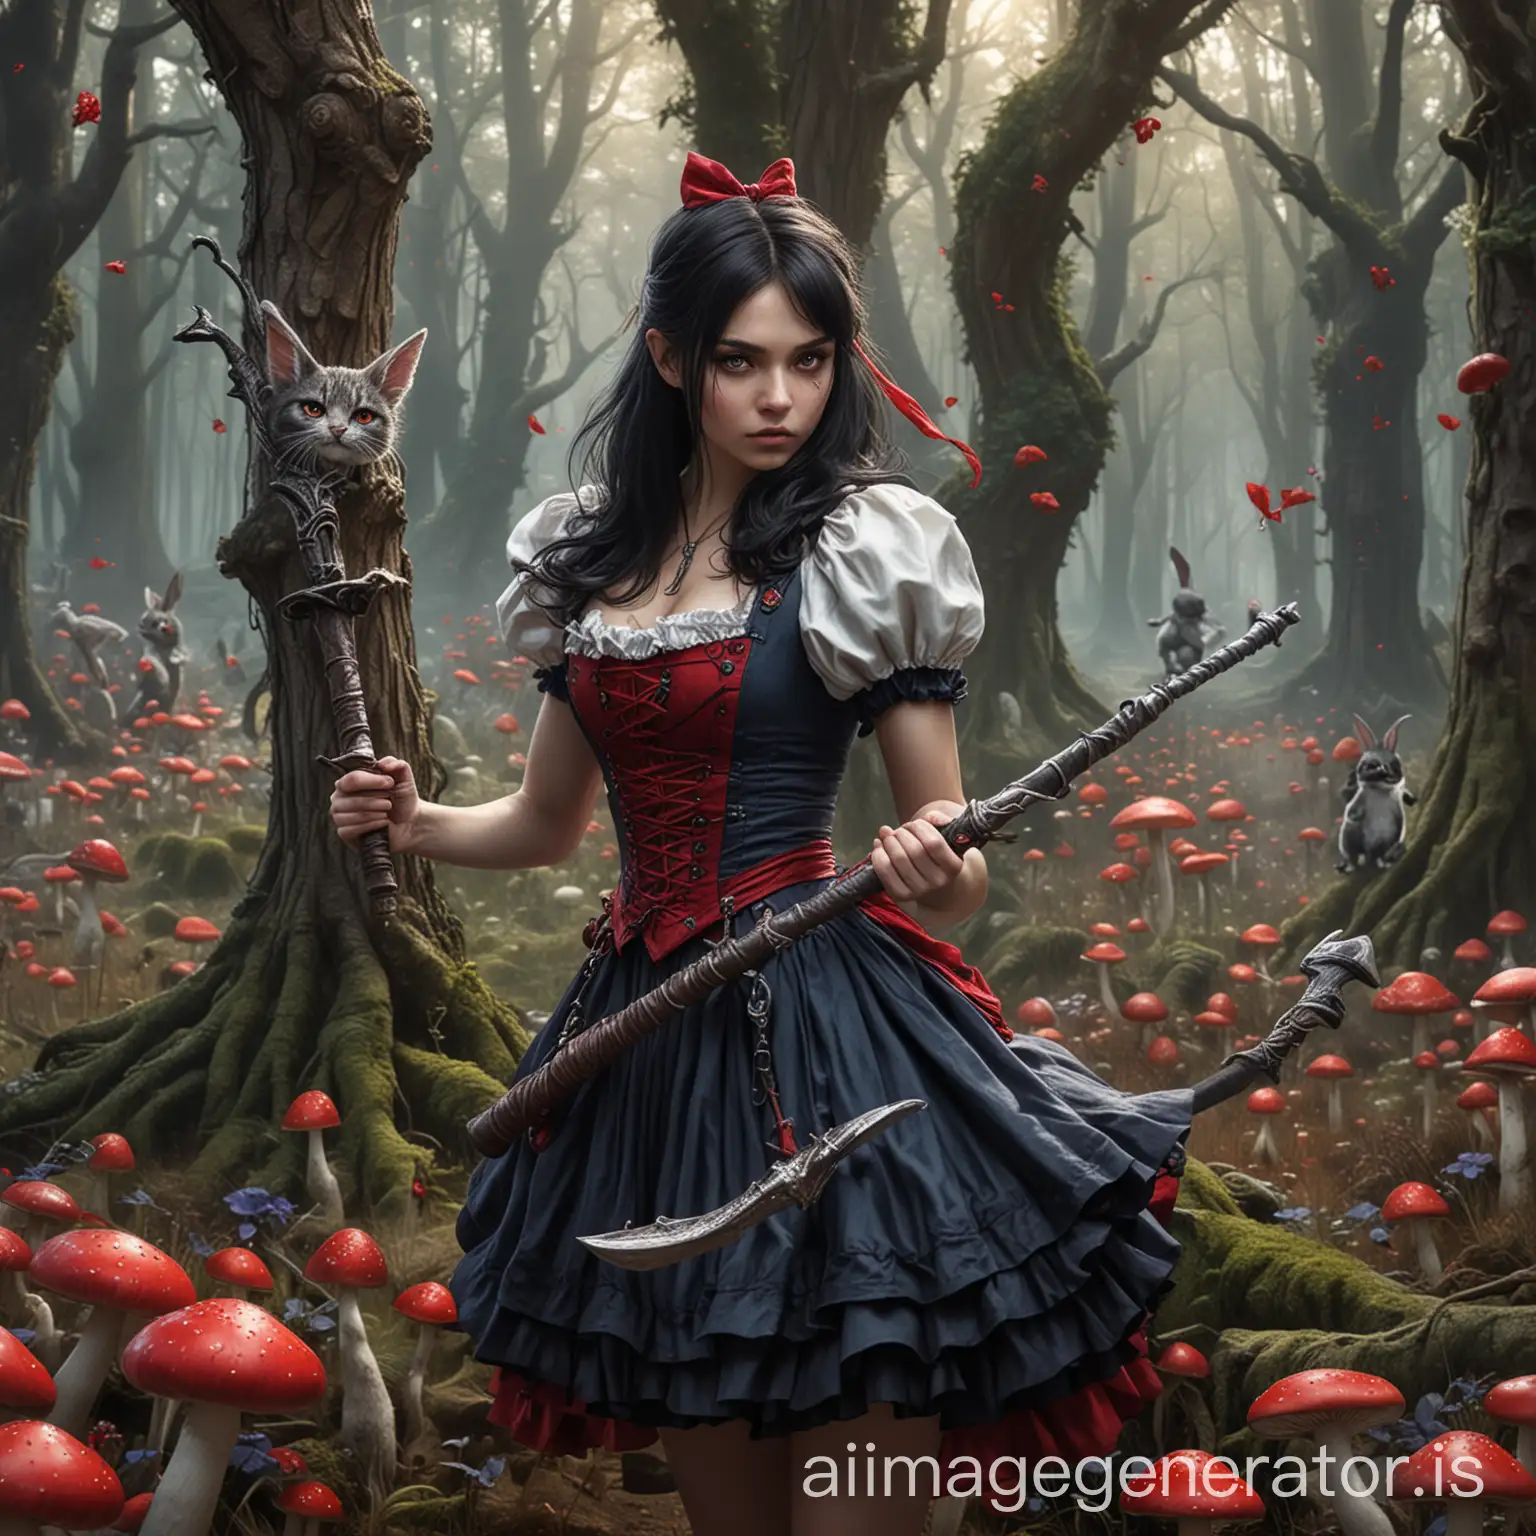 Young-Sorcerer-with-Quarter-Staff-in-Enchanted-Forest